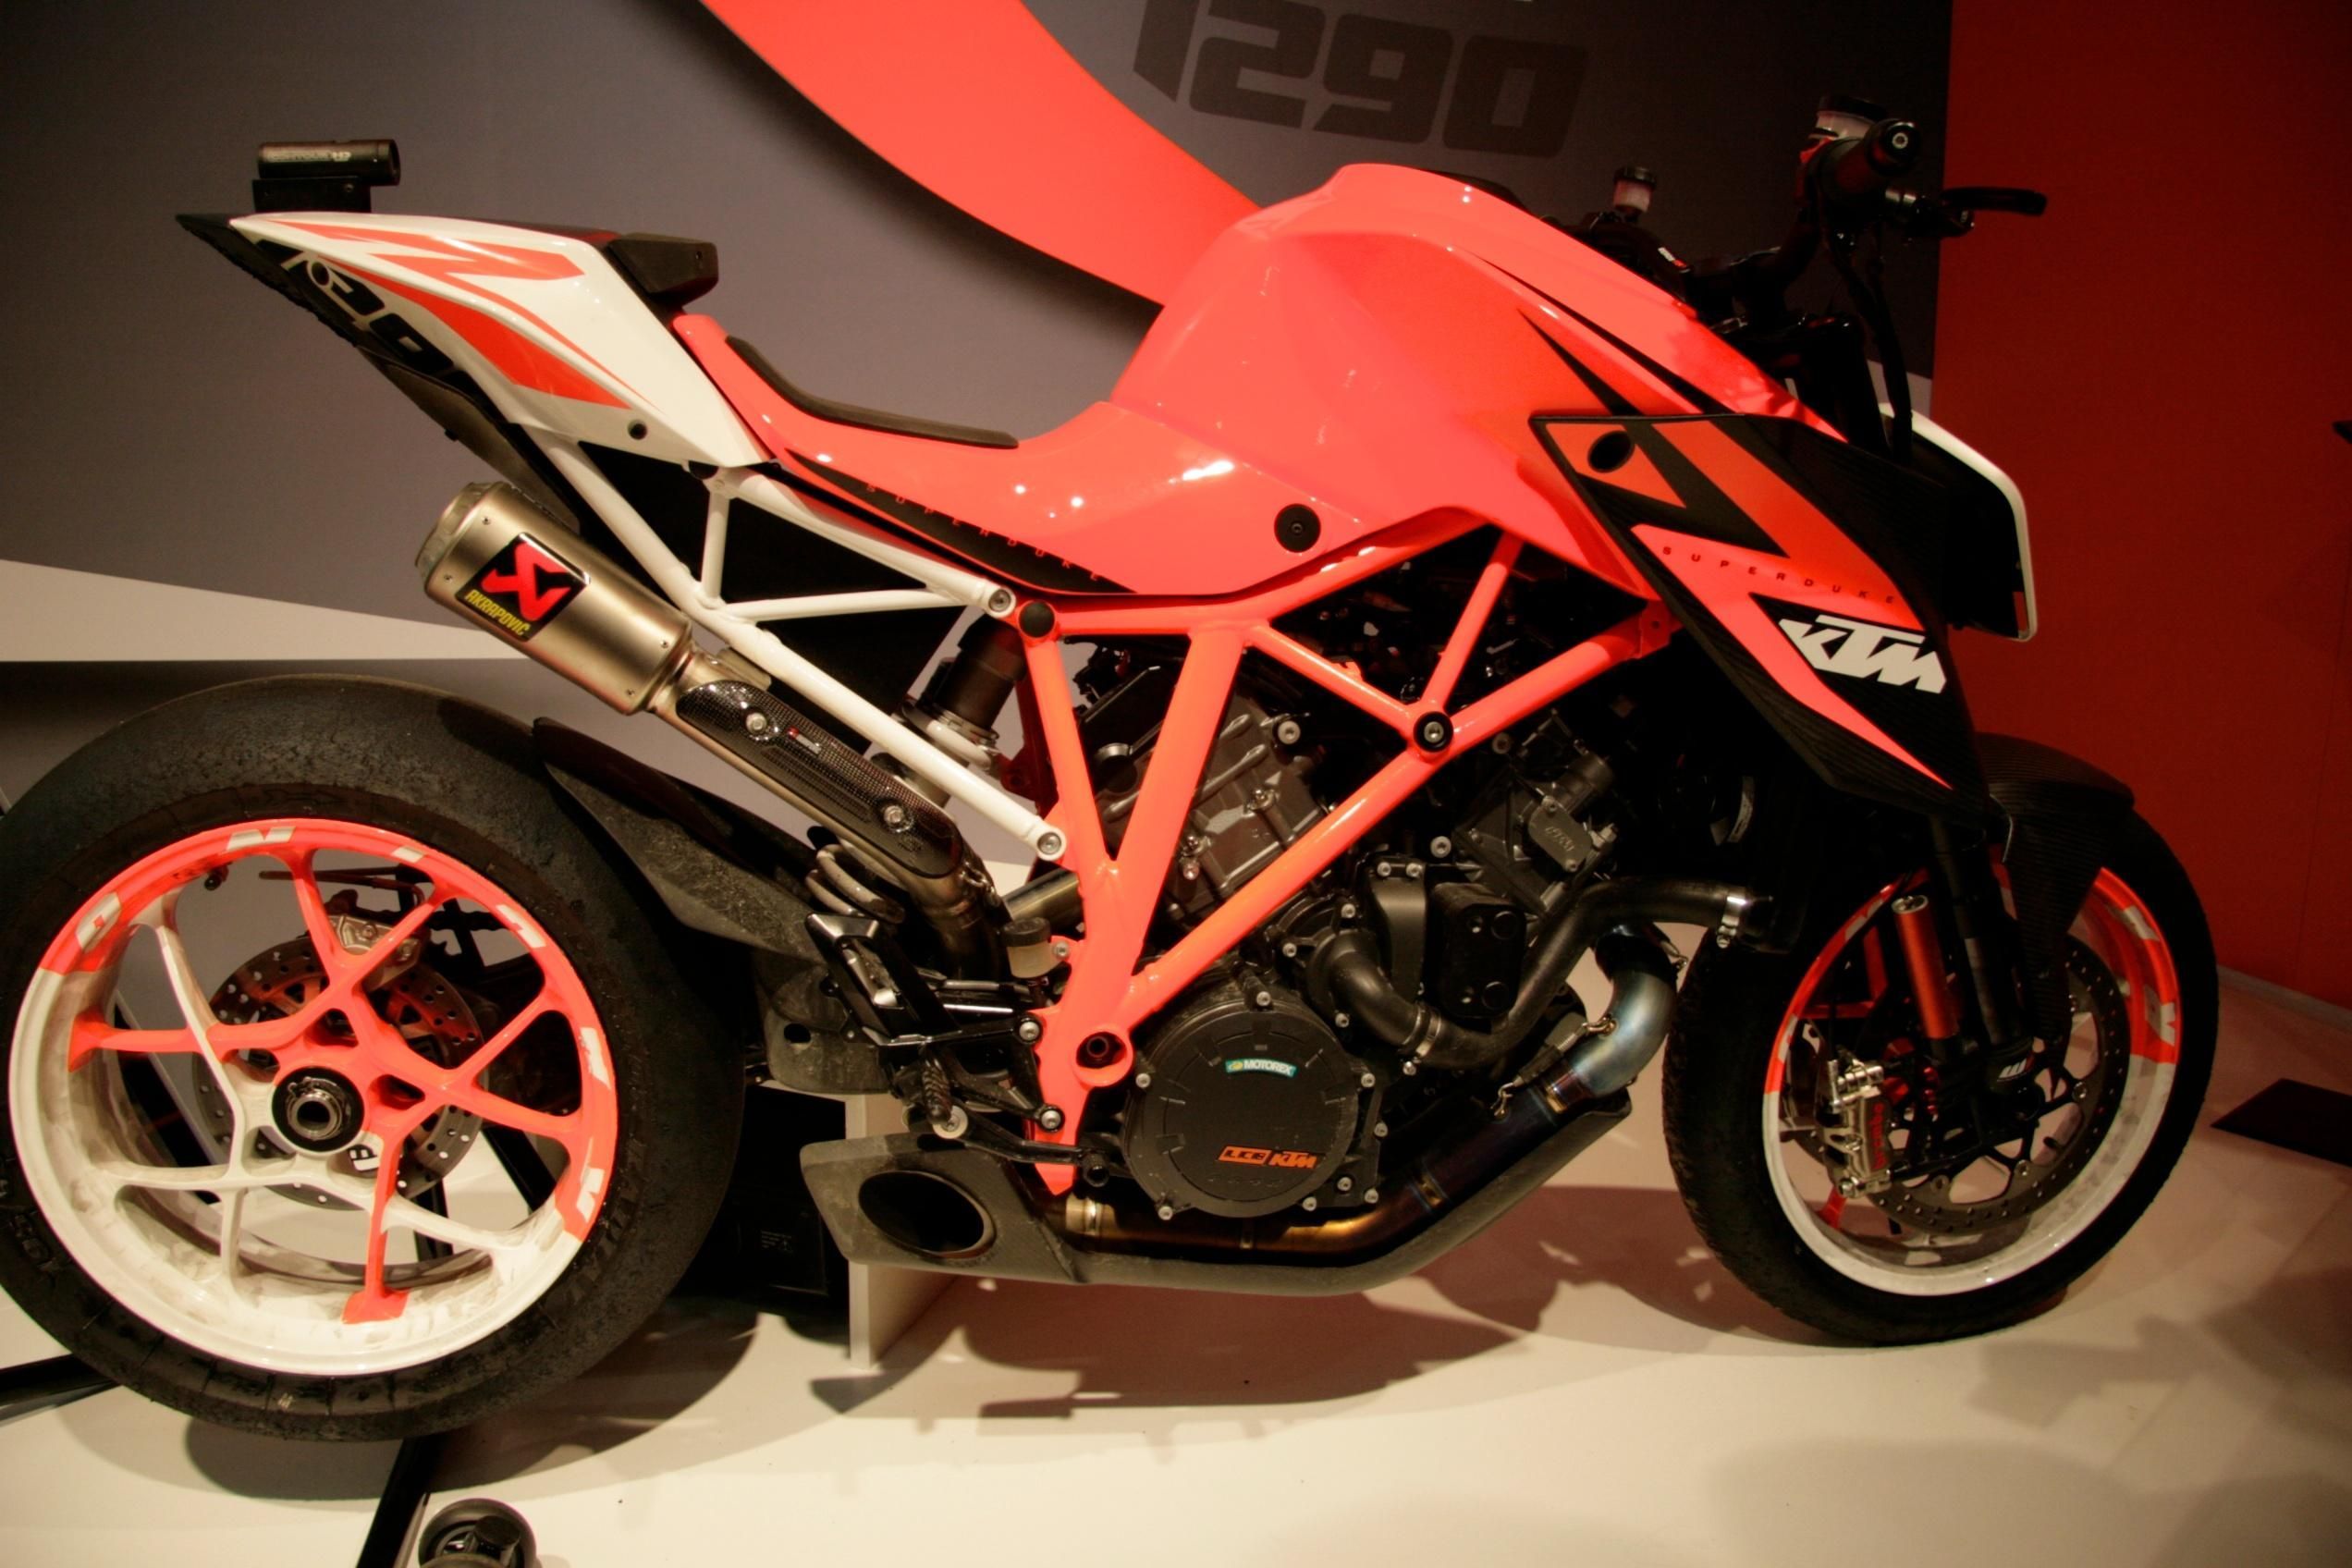 A first look at the KTM Superduke 1290R